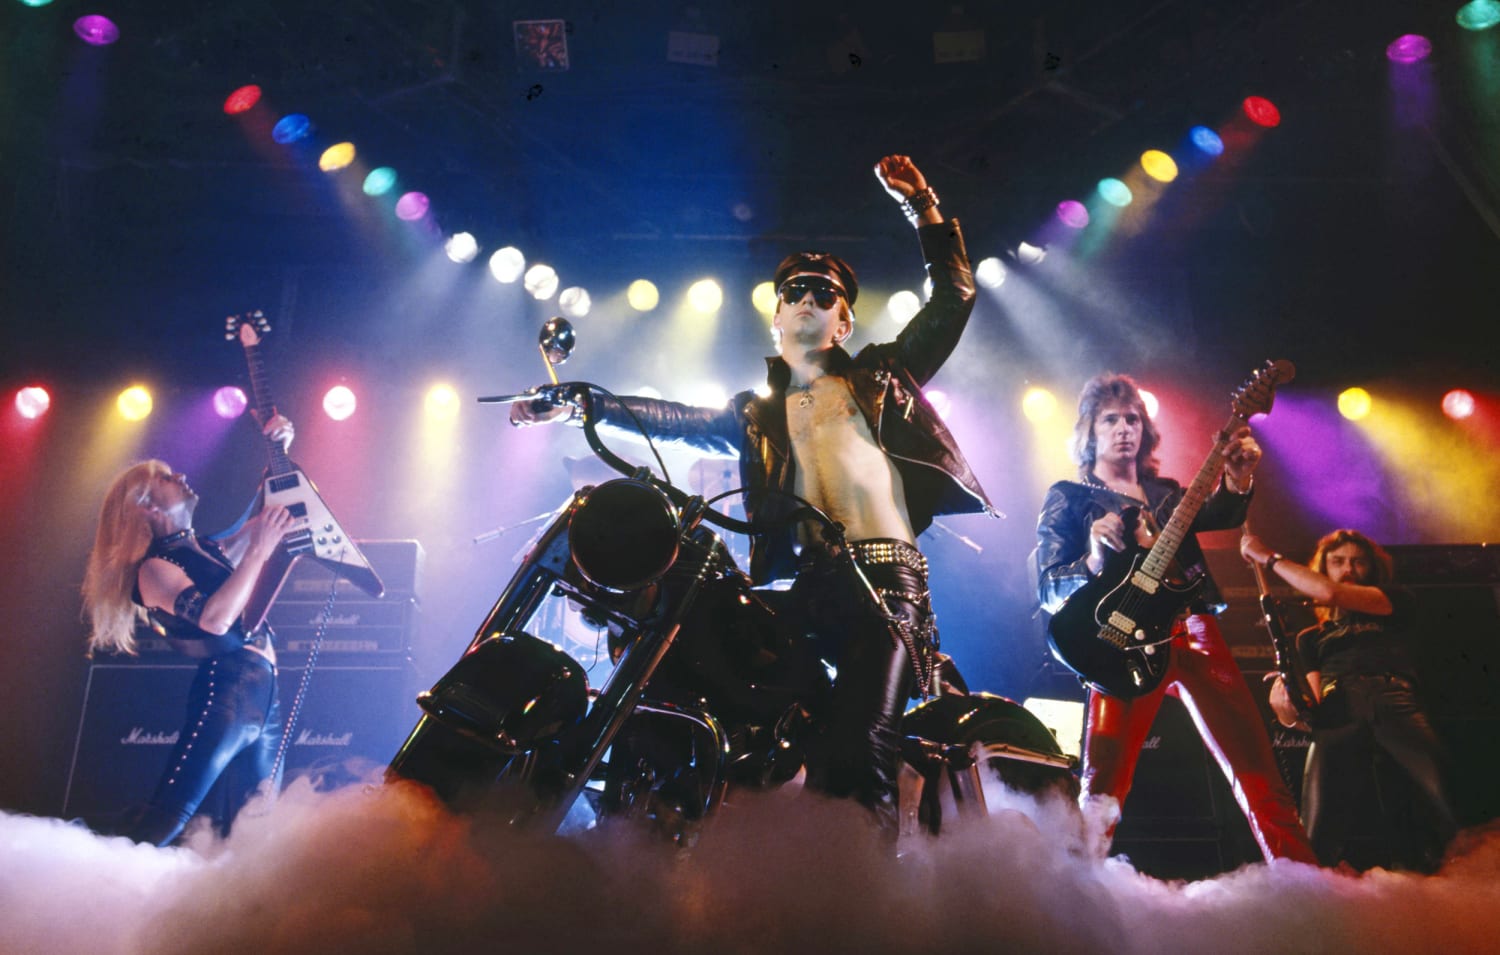 Why the only openly gay heavy metal superstar, Judas Priests Rob Halford, hid his sexuality